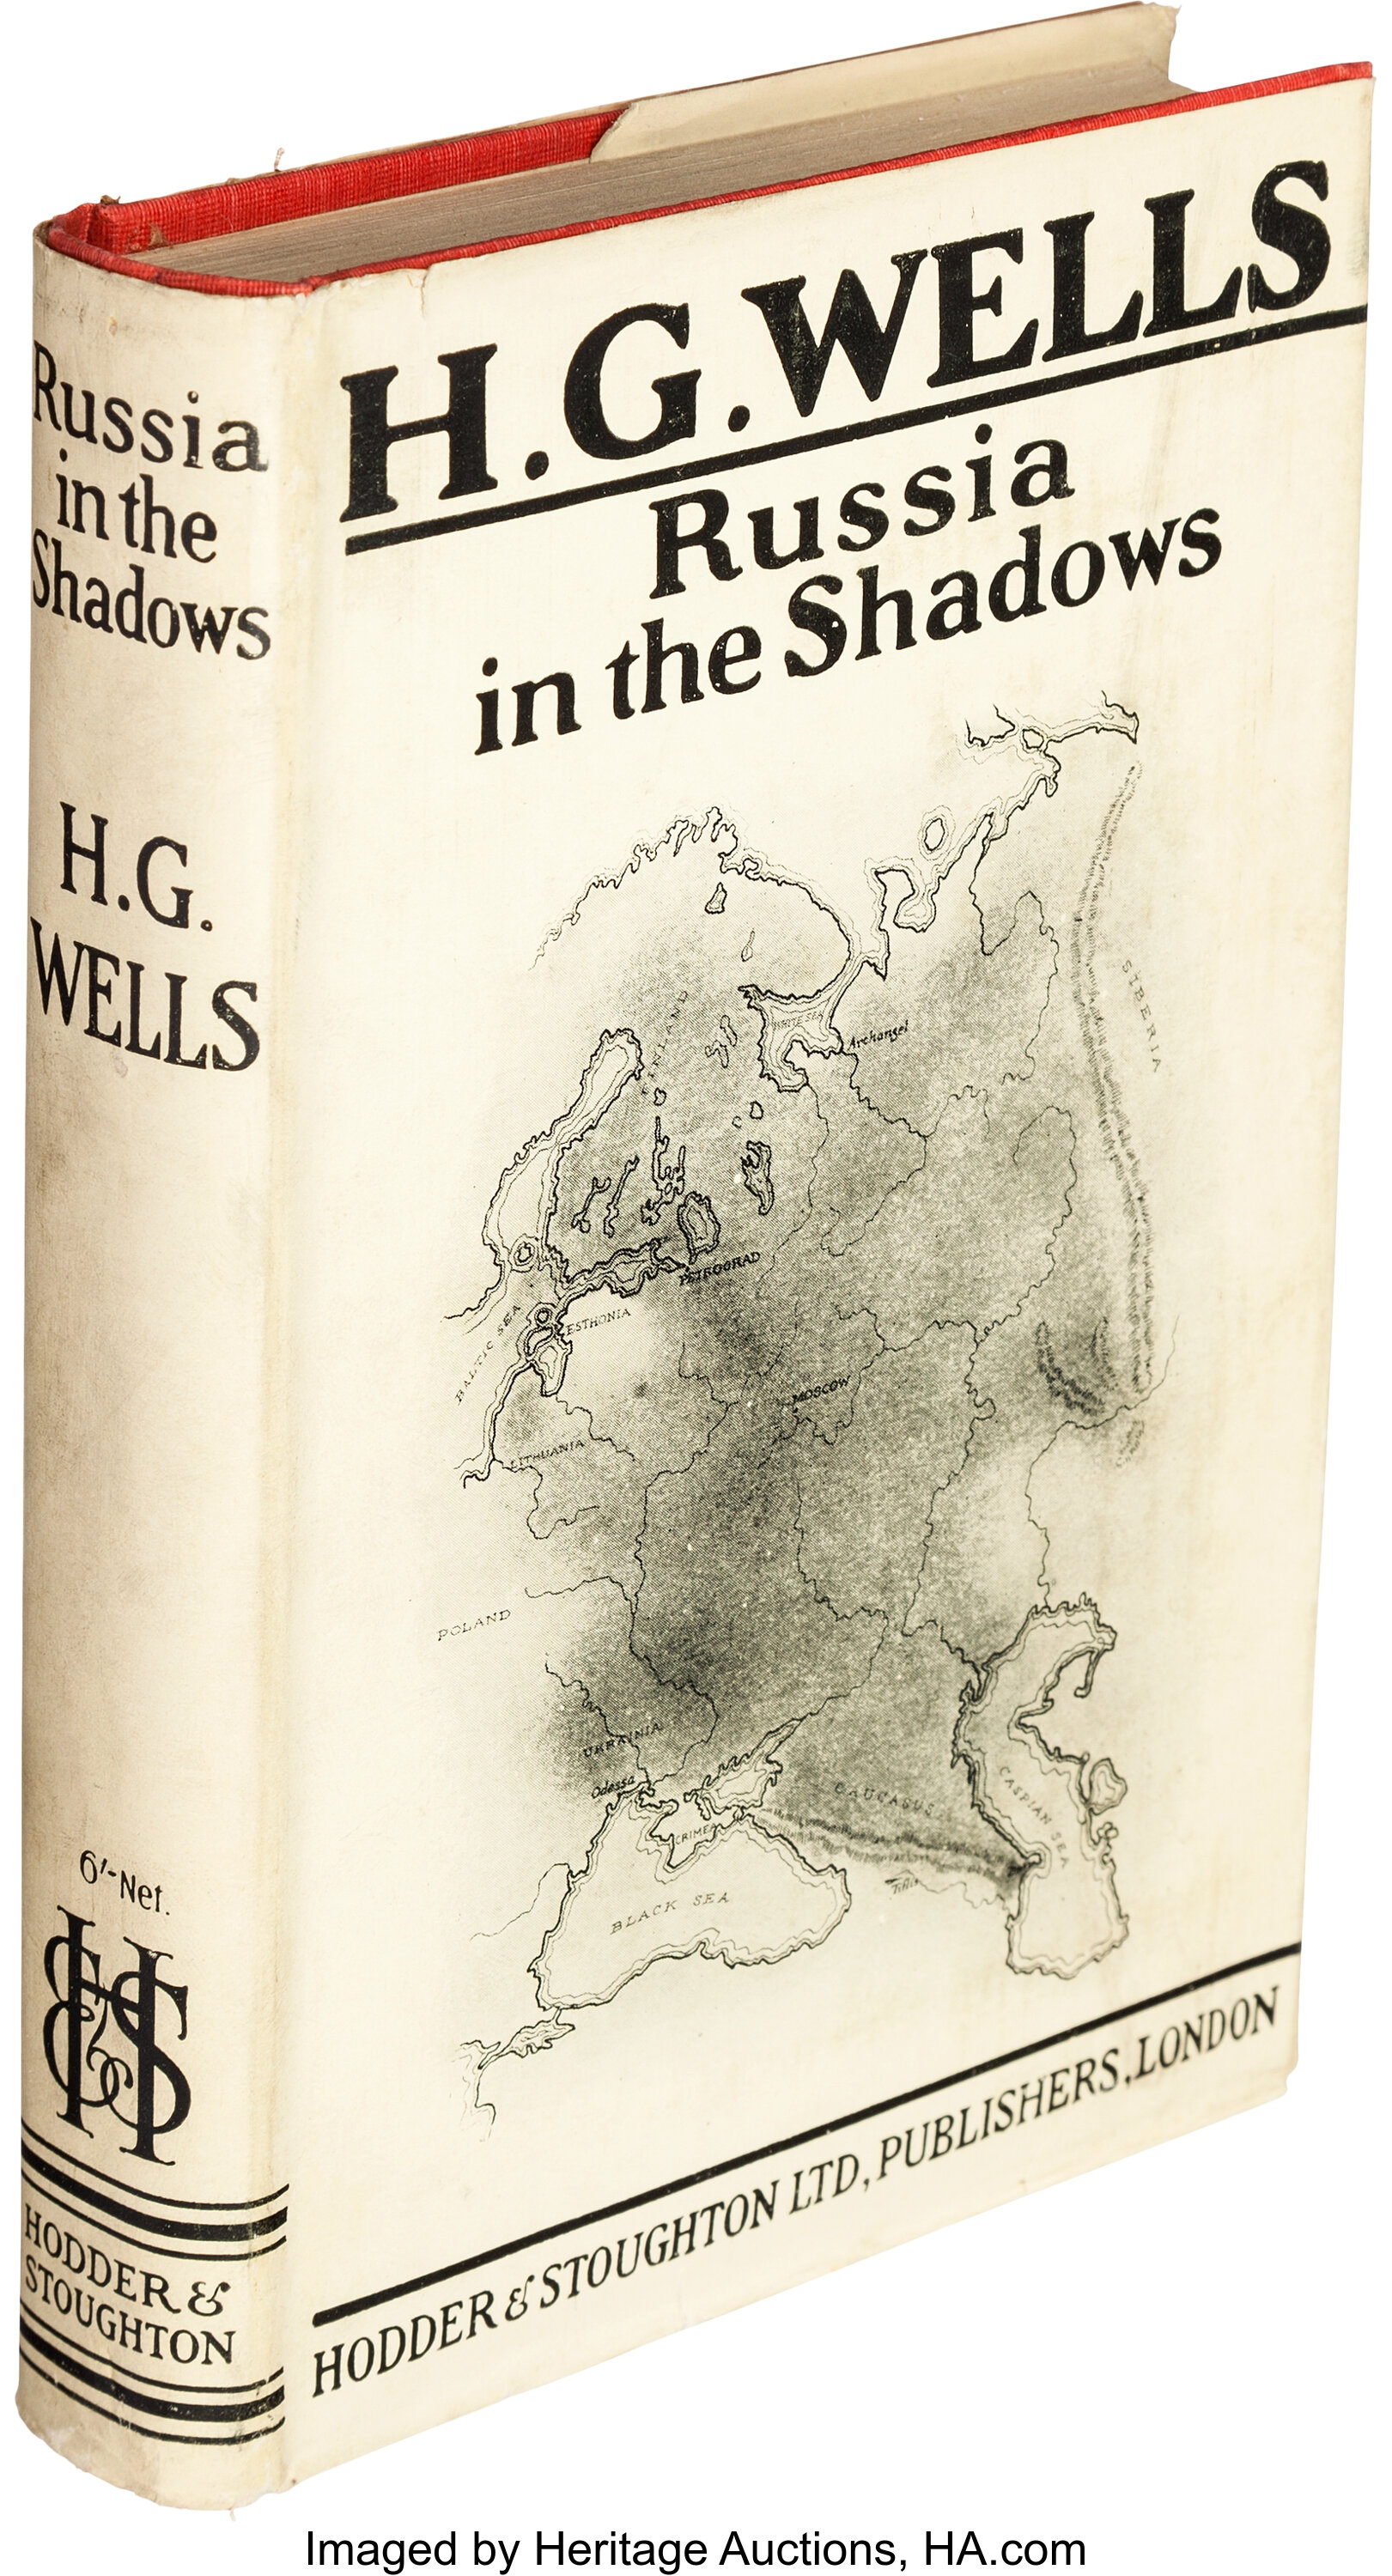 H. G. Wells. Russia in the Shadows. London: Hodder and Stoughton